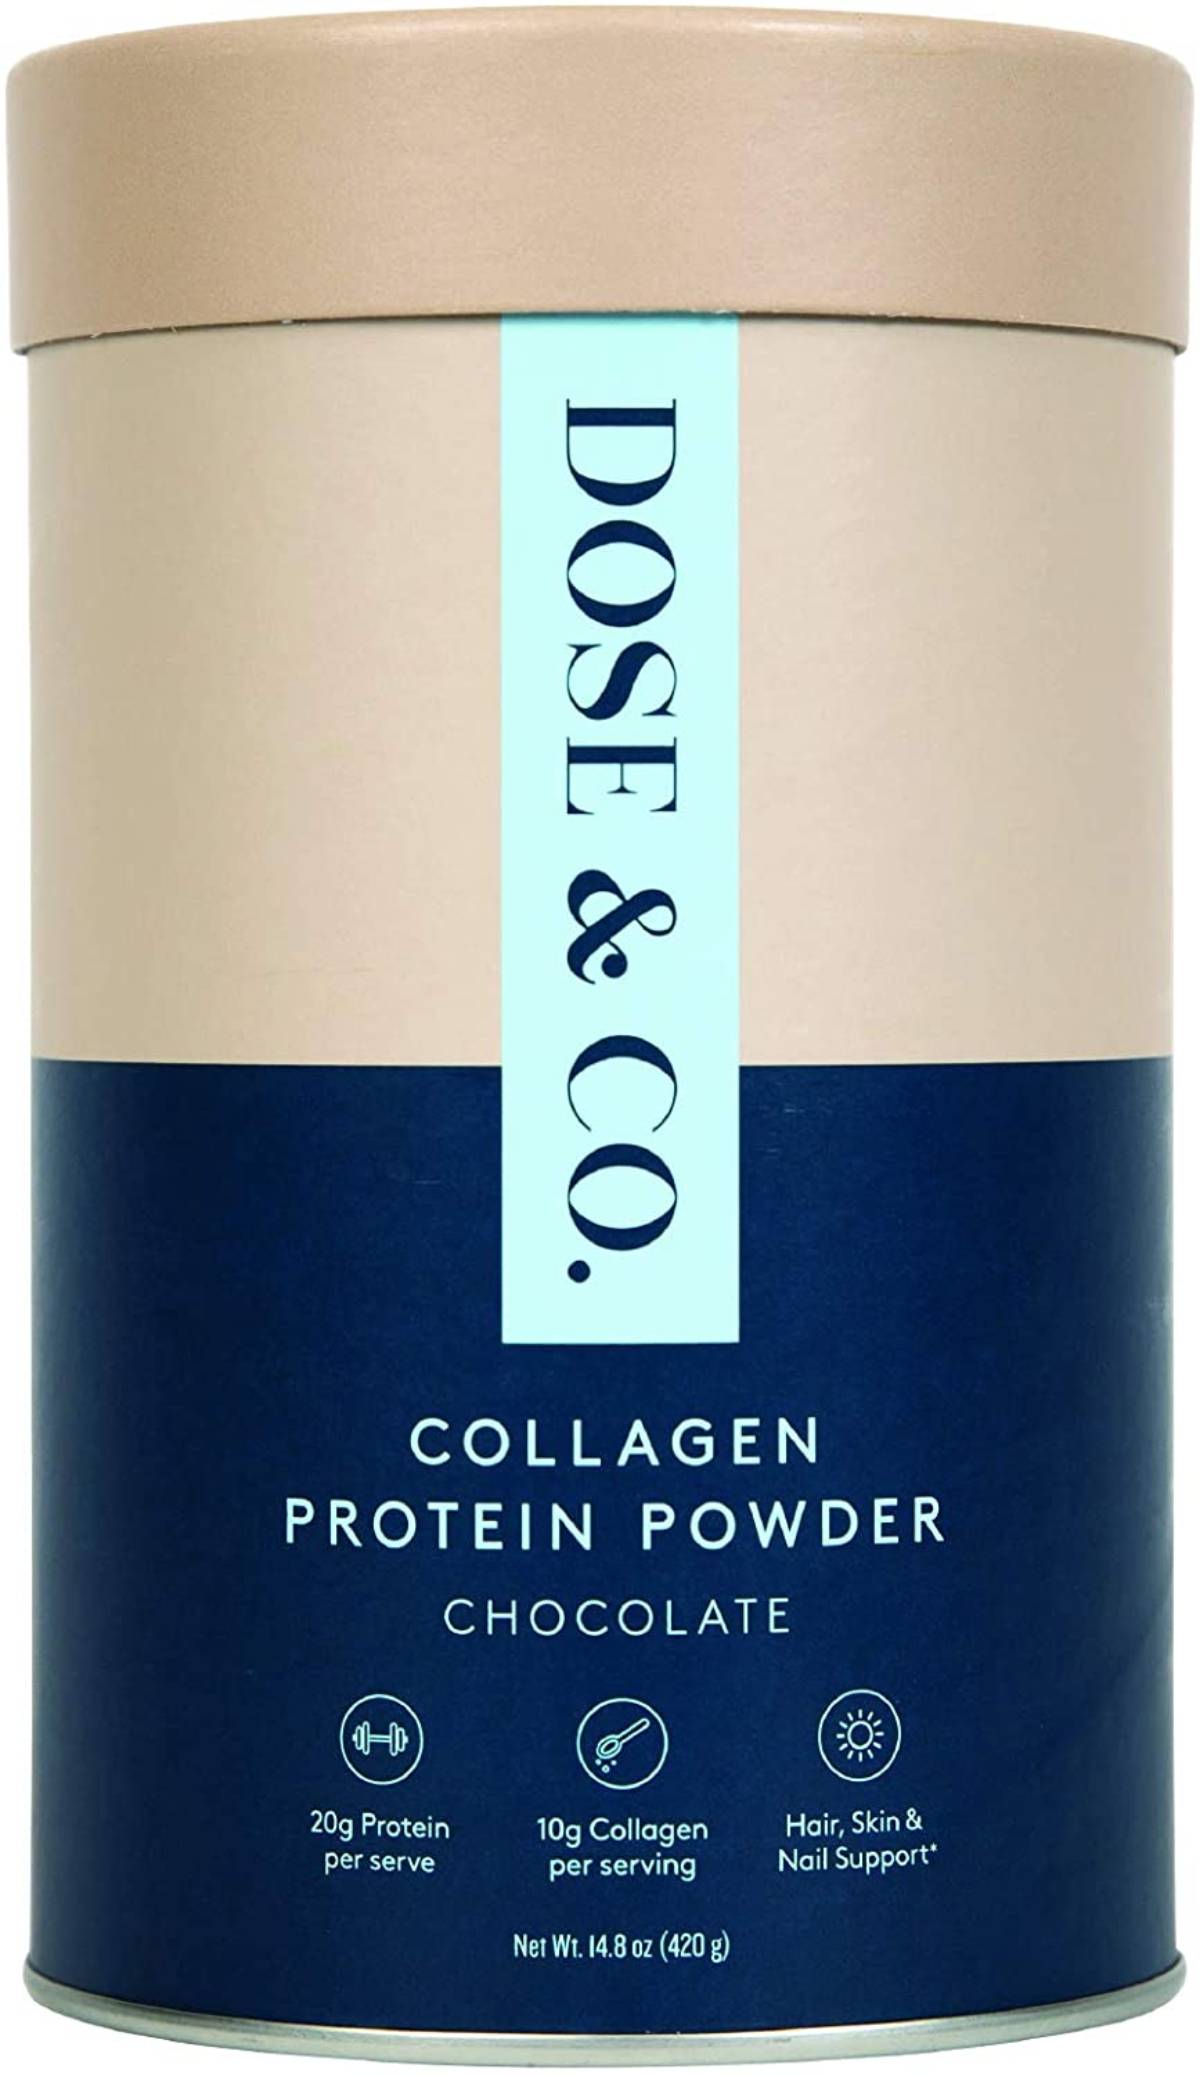 Why Collagen Powder is Good For More Than Just Your Skin